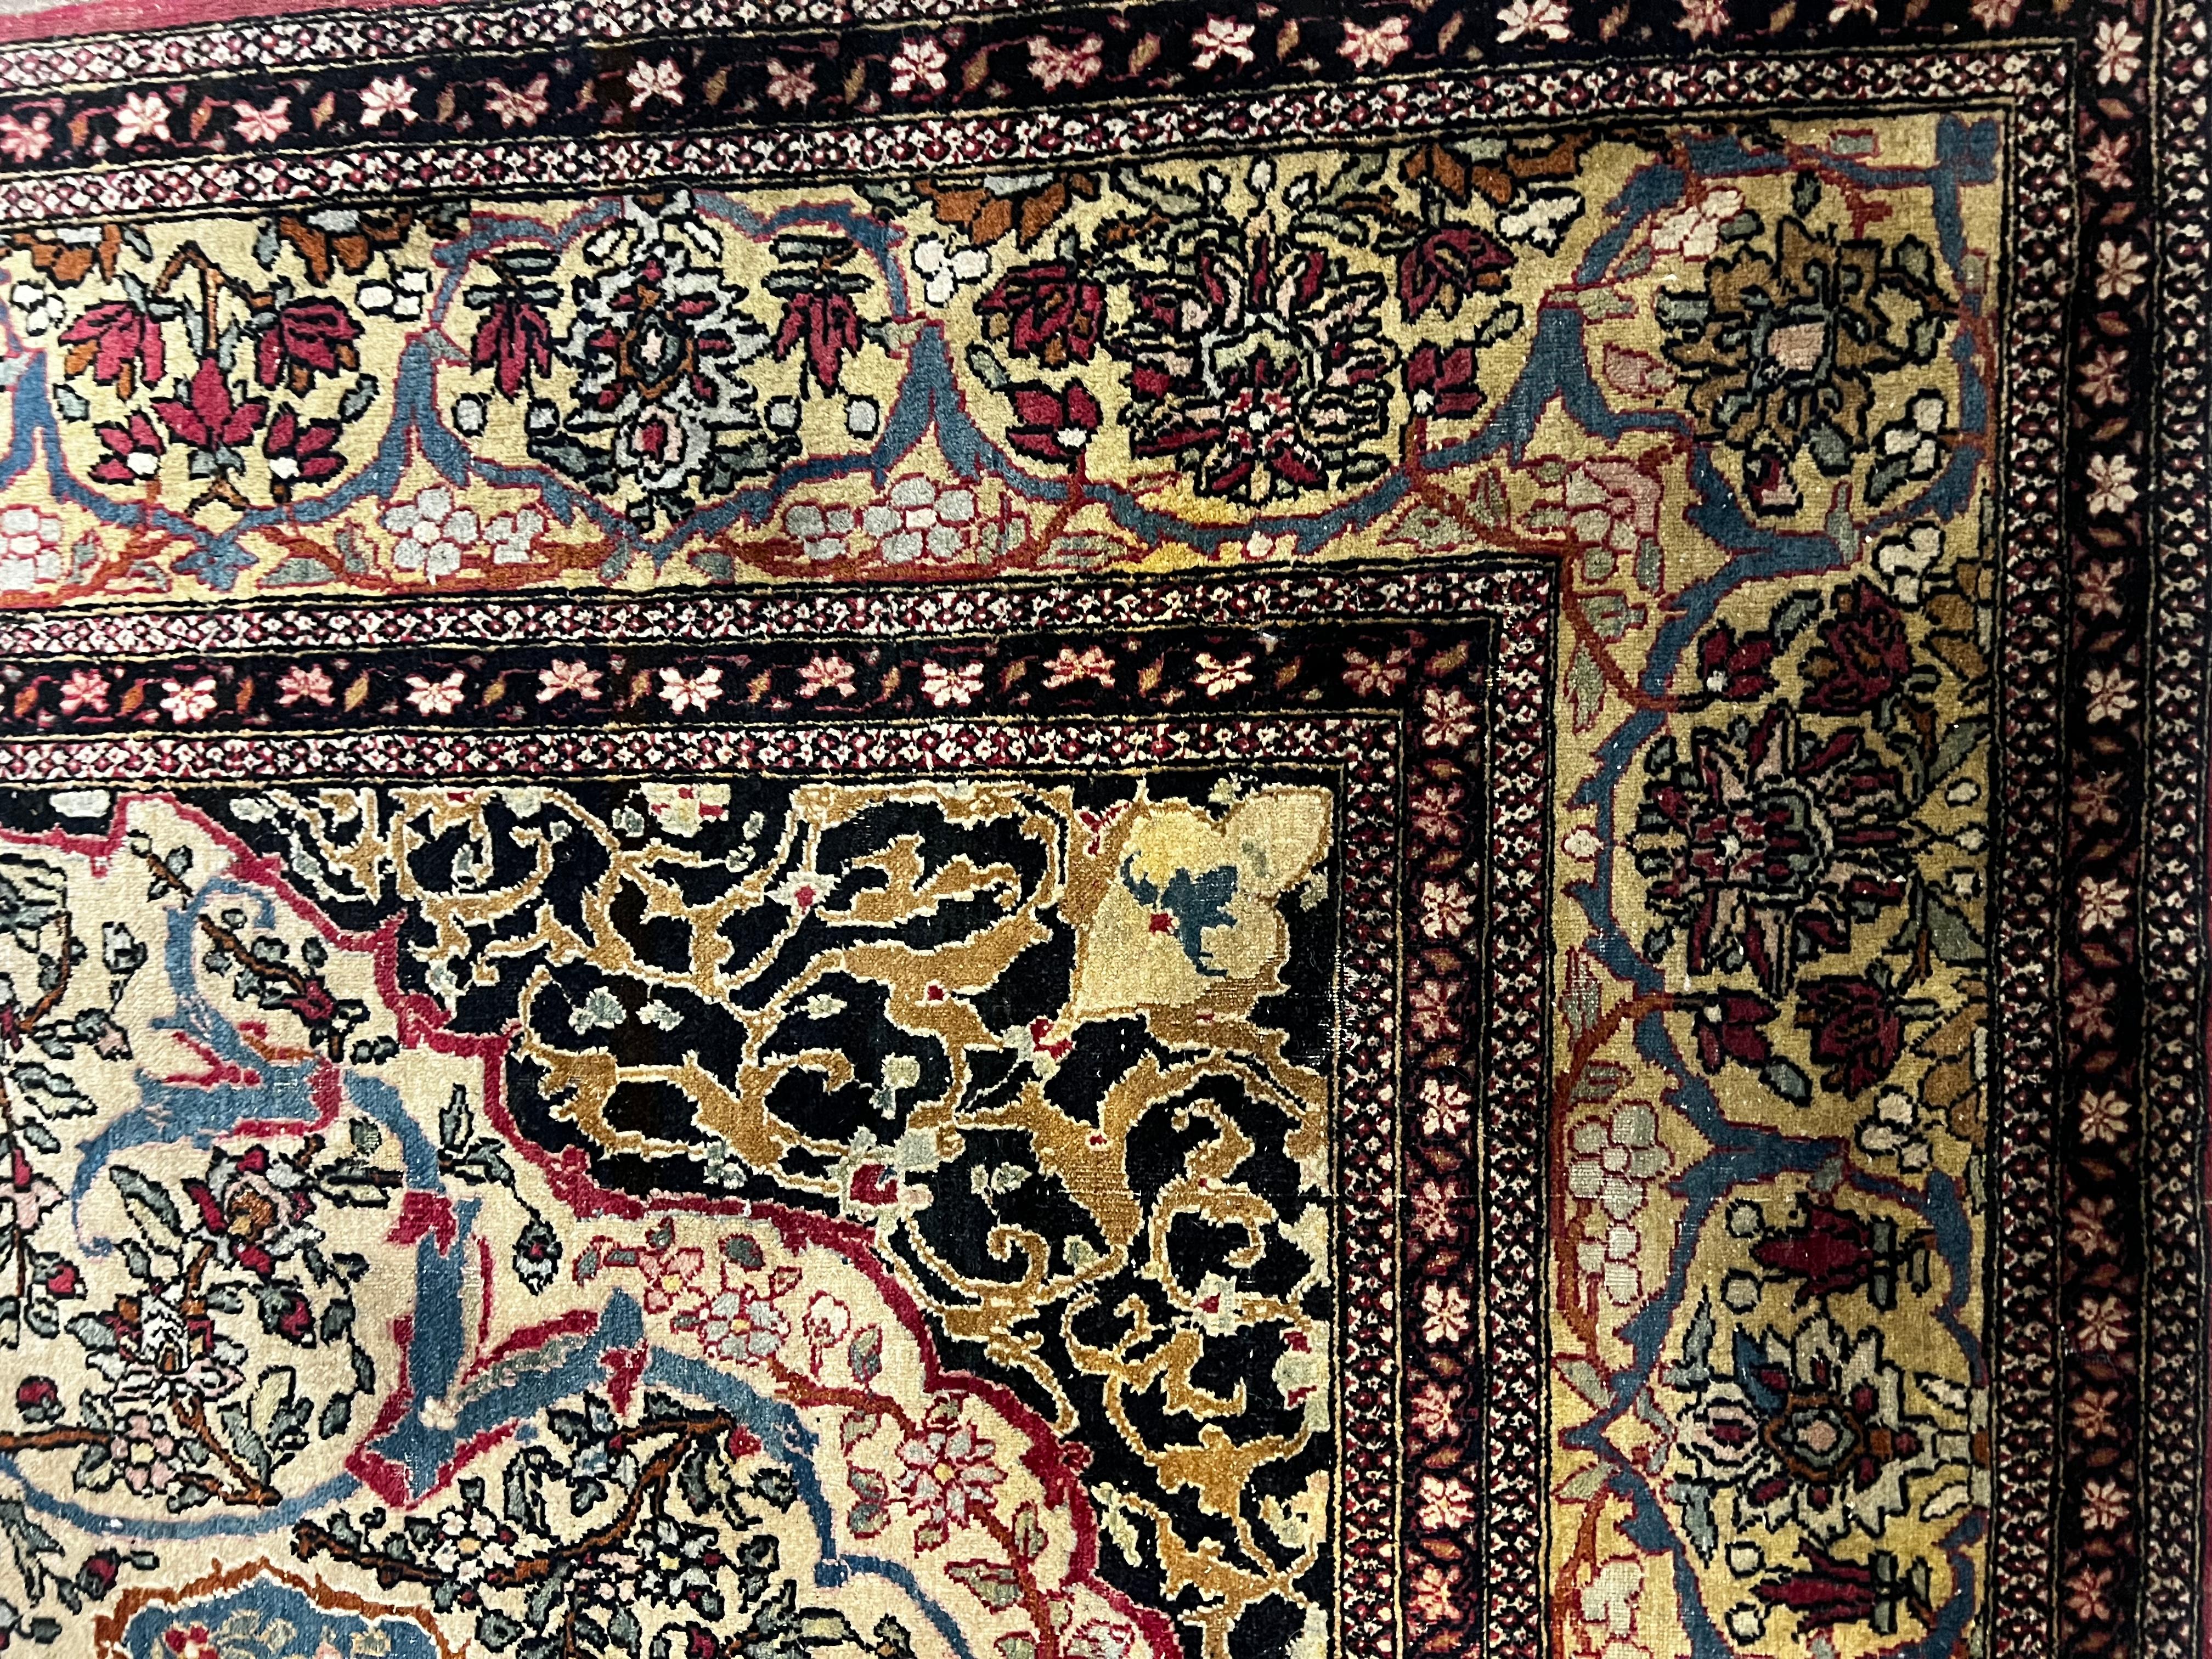 This outstanding Mohtasham Kashan from 1880s is a true piece of art. It has a very complex ornamentations and arabesques as well as very rich variation of colors which identify a real high collectable rugs and carpets. This Mohtasham has a superior